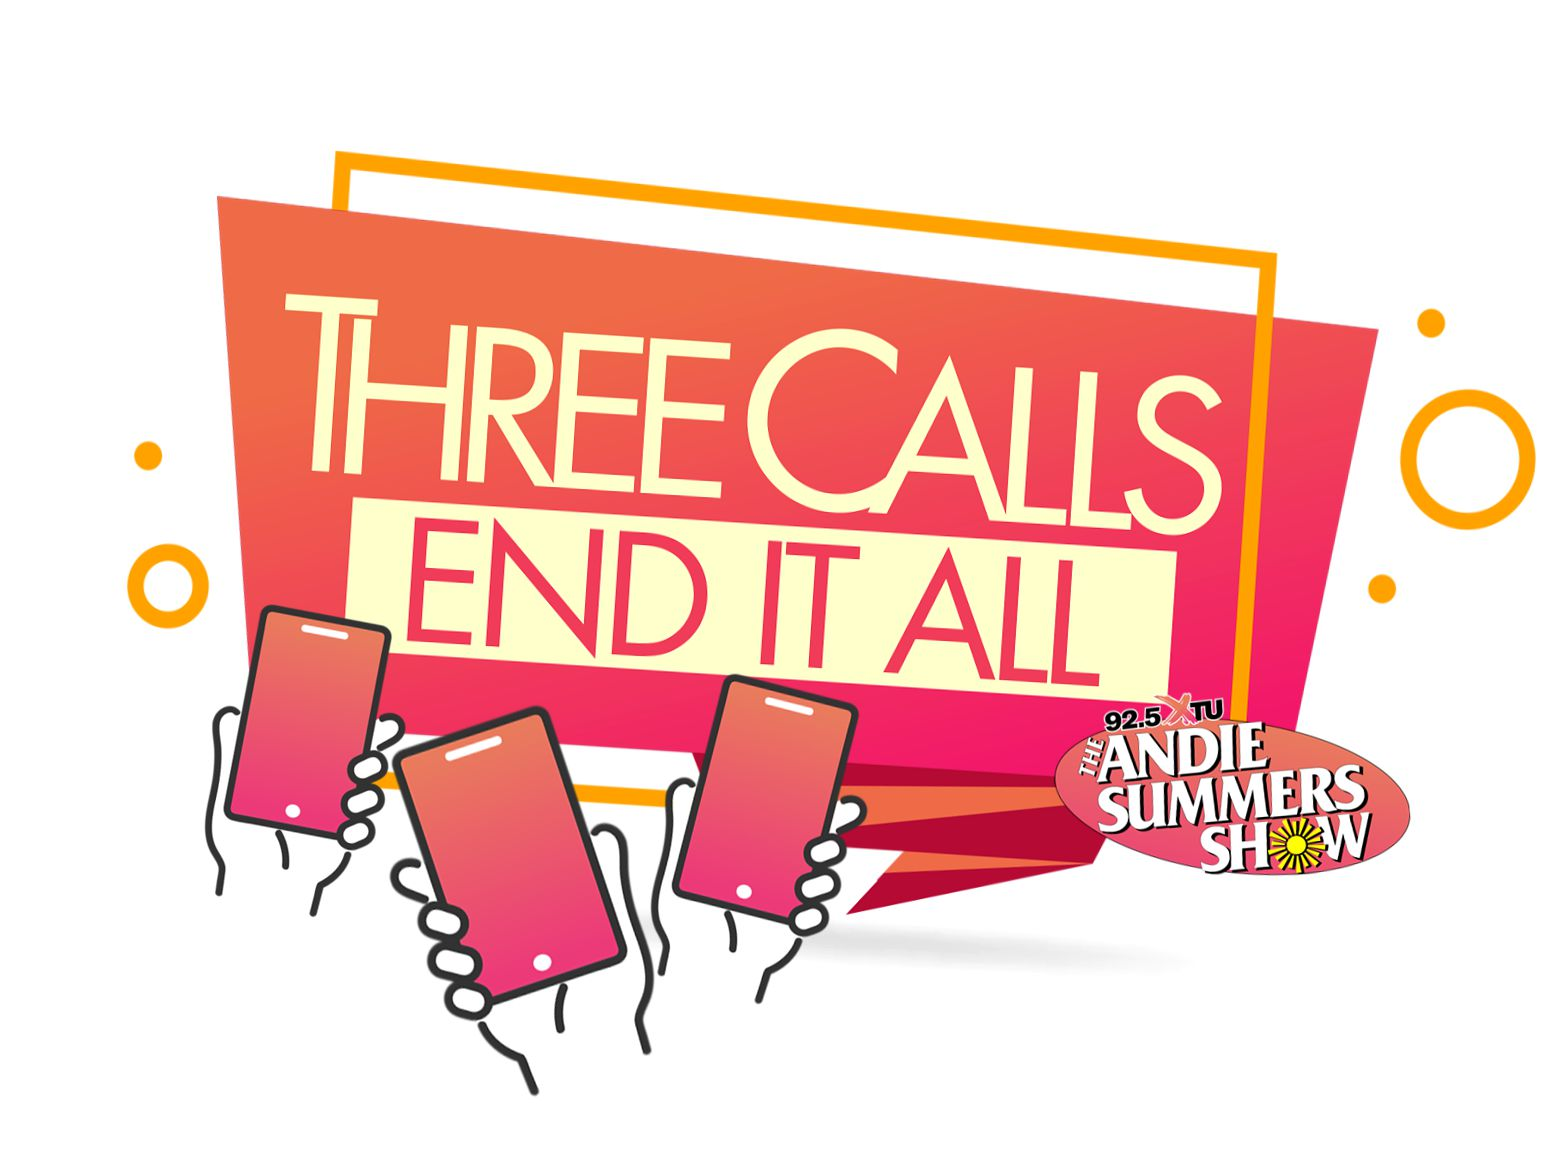 Three Calls End It All: "Was I Wrong To Take A Mental Health Day For Myself?"